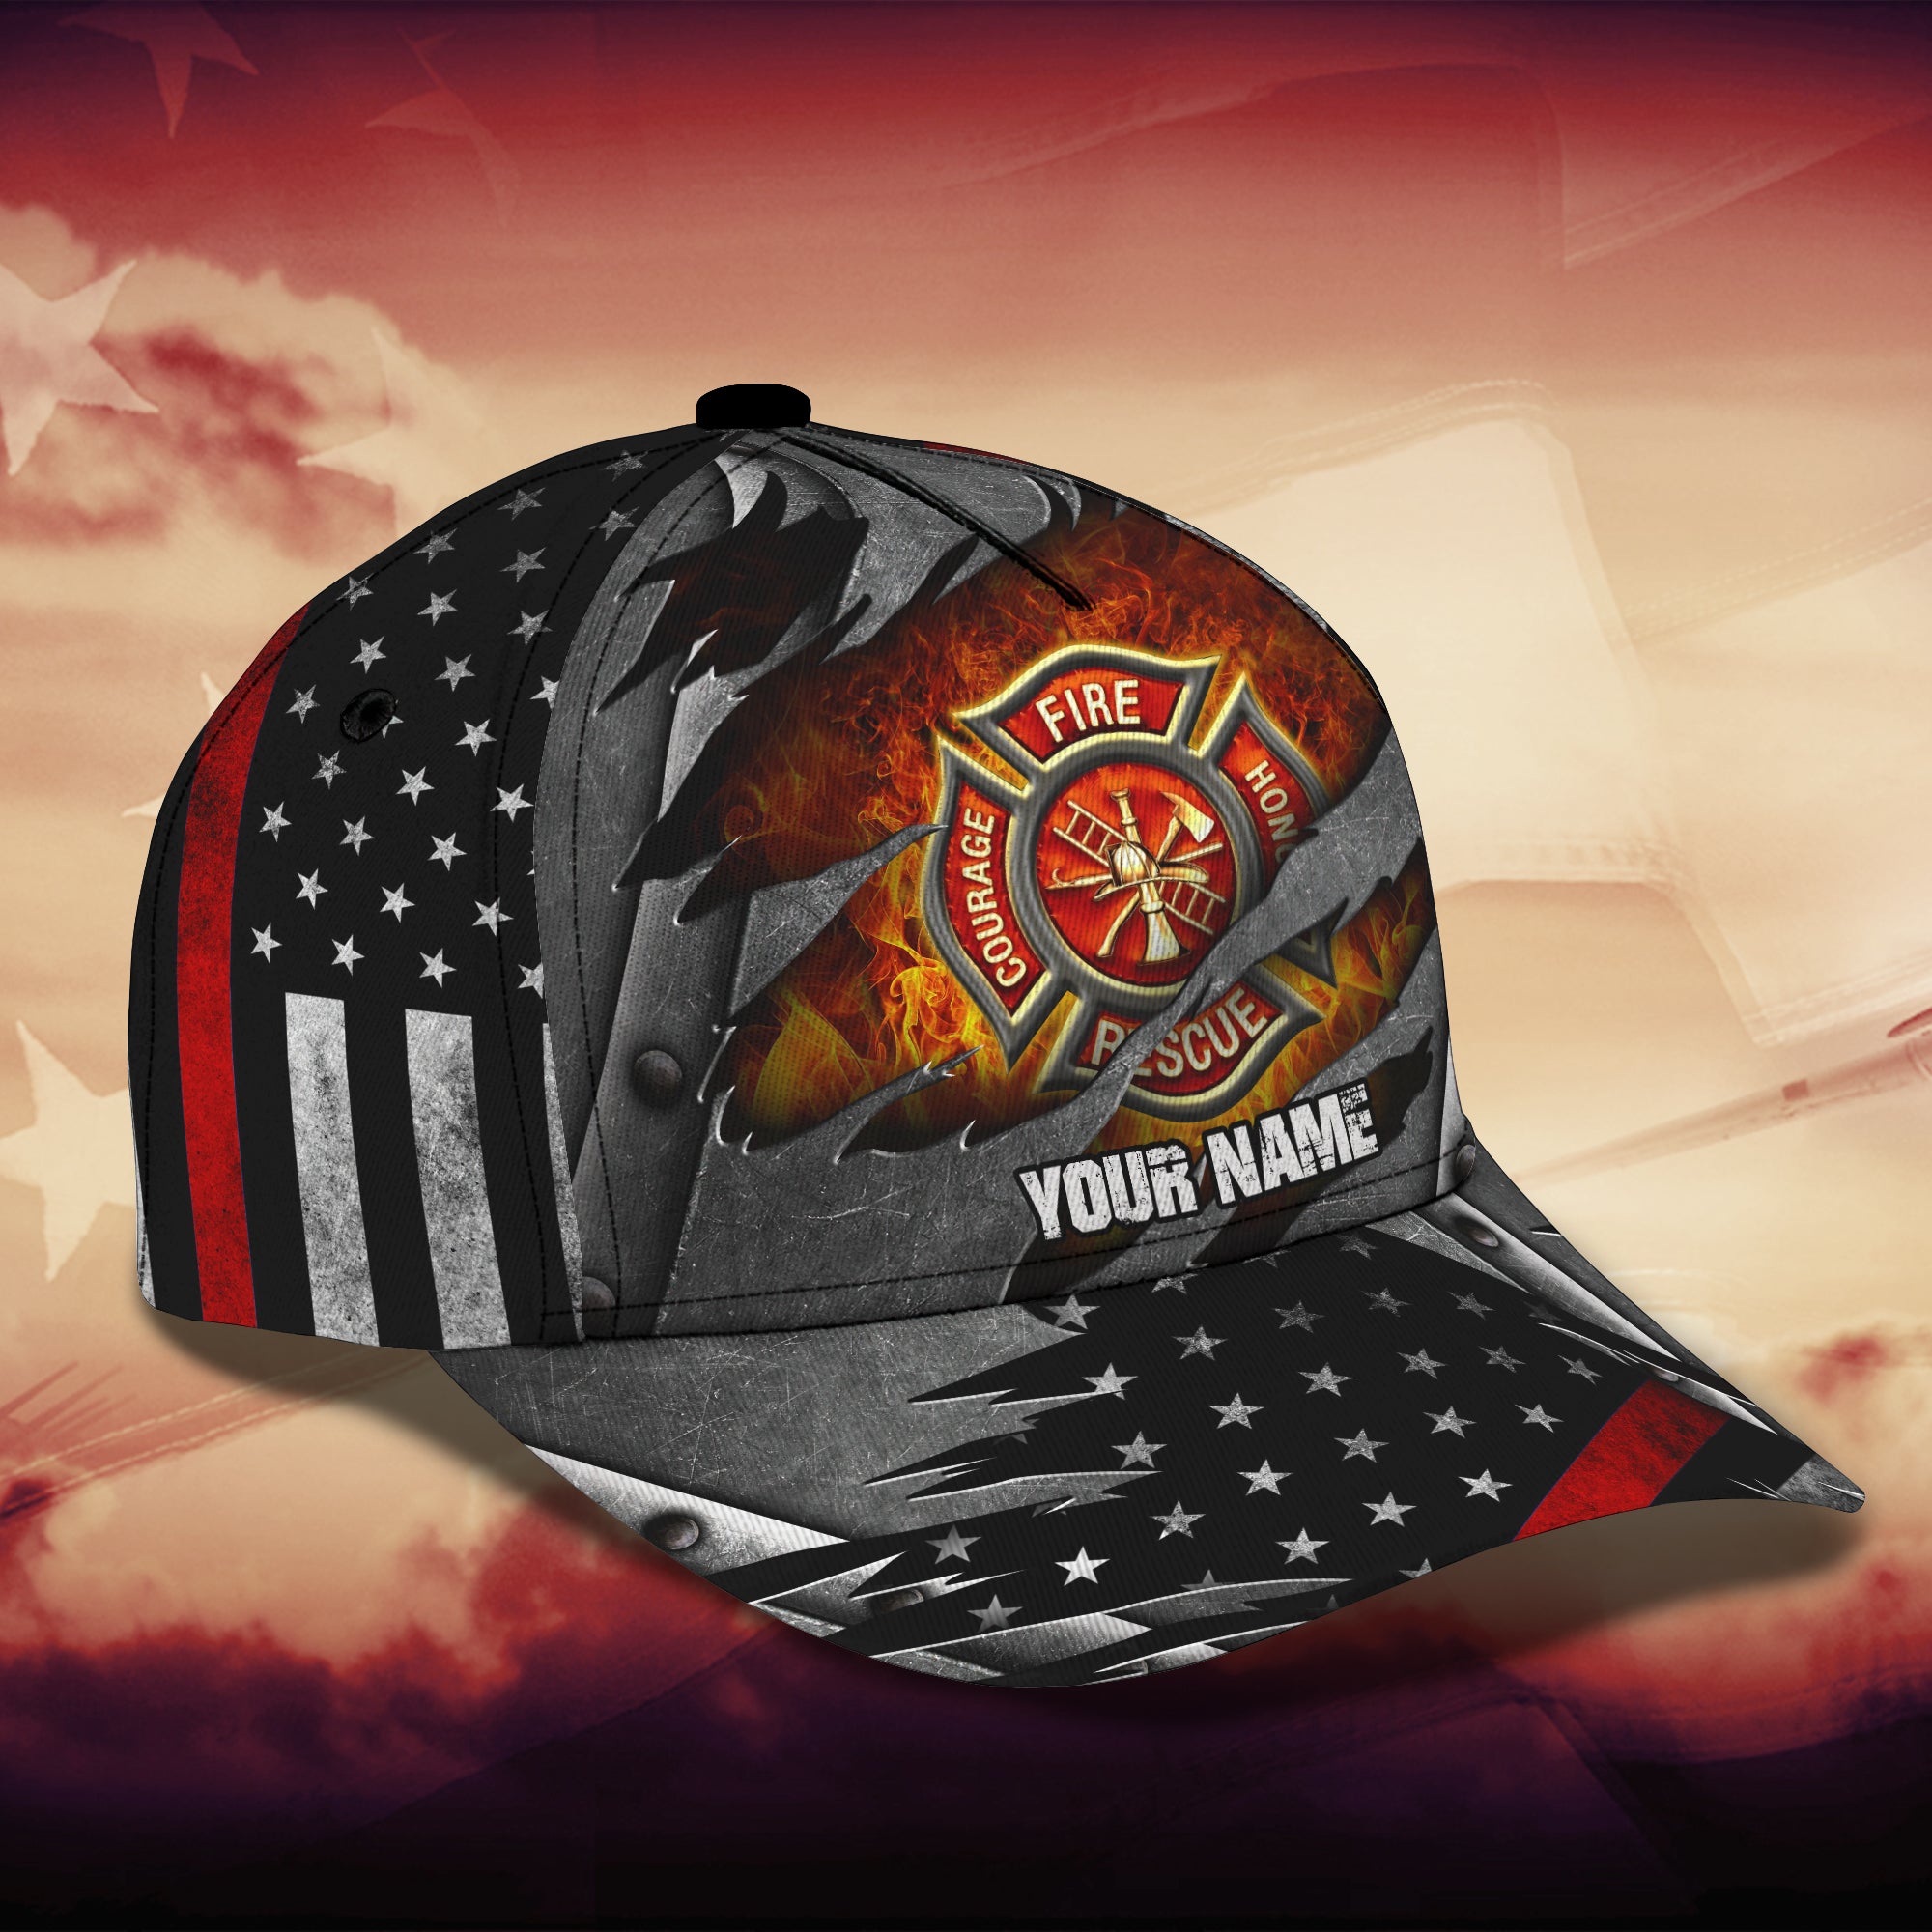 Firefighter - Personalized Name Cap - Tra96